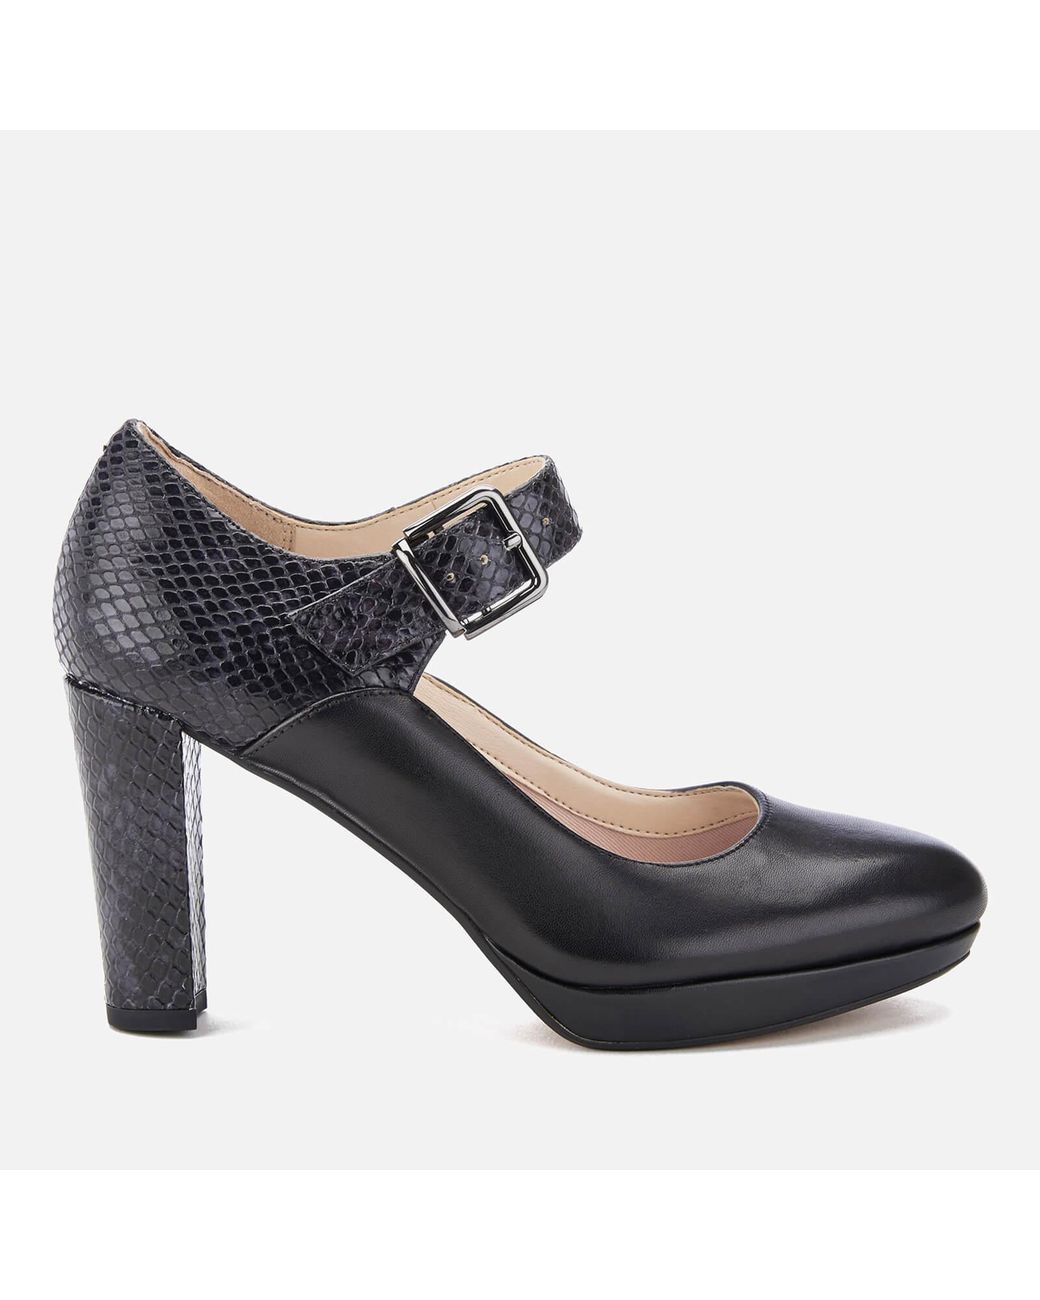 Clarks Kendra Gaby Leather Mary Jane Heels in Black | Lyst Canada